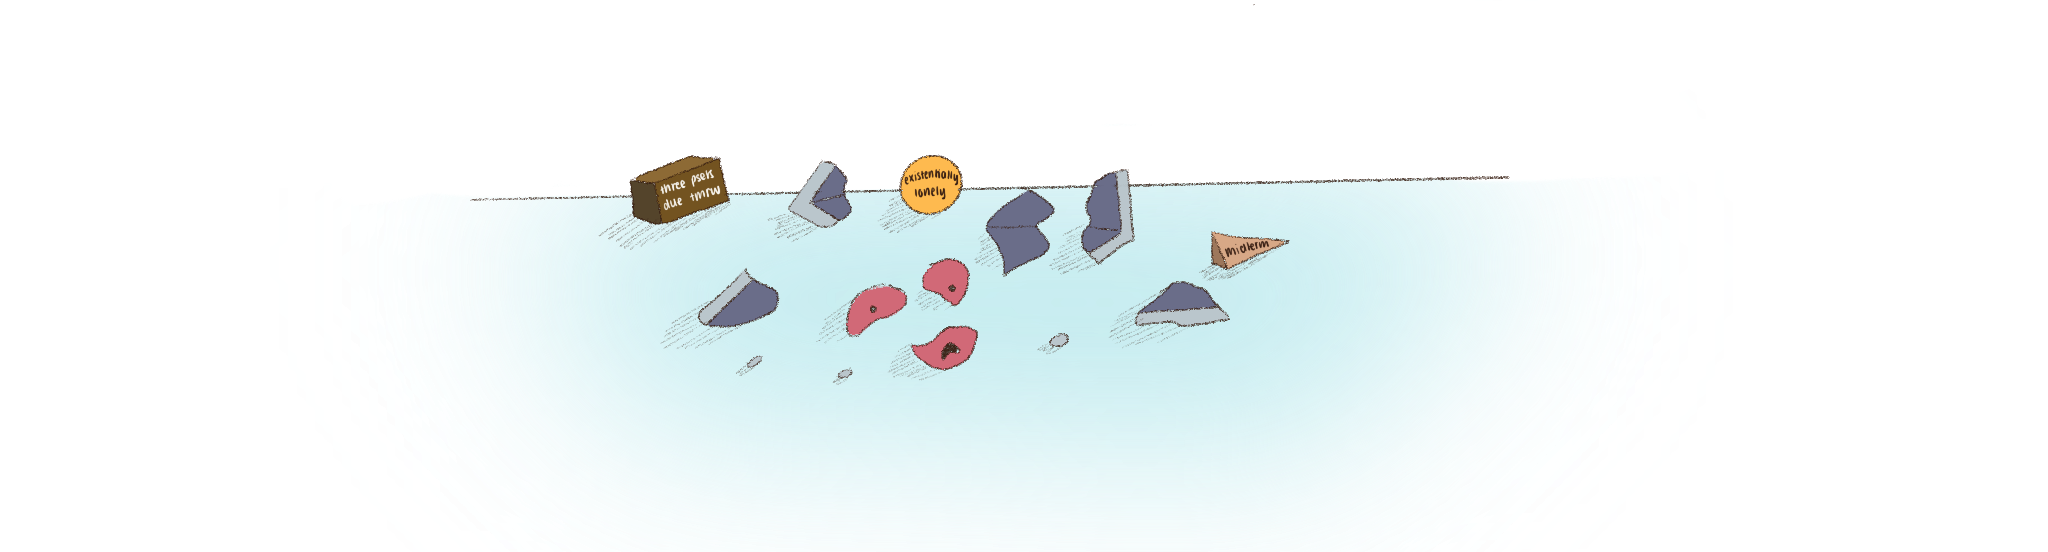 the same box as before, but now in shards; weights lie scattered around the shards